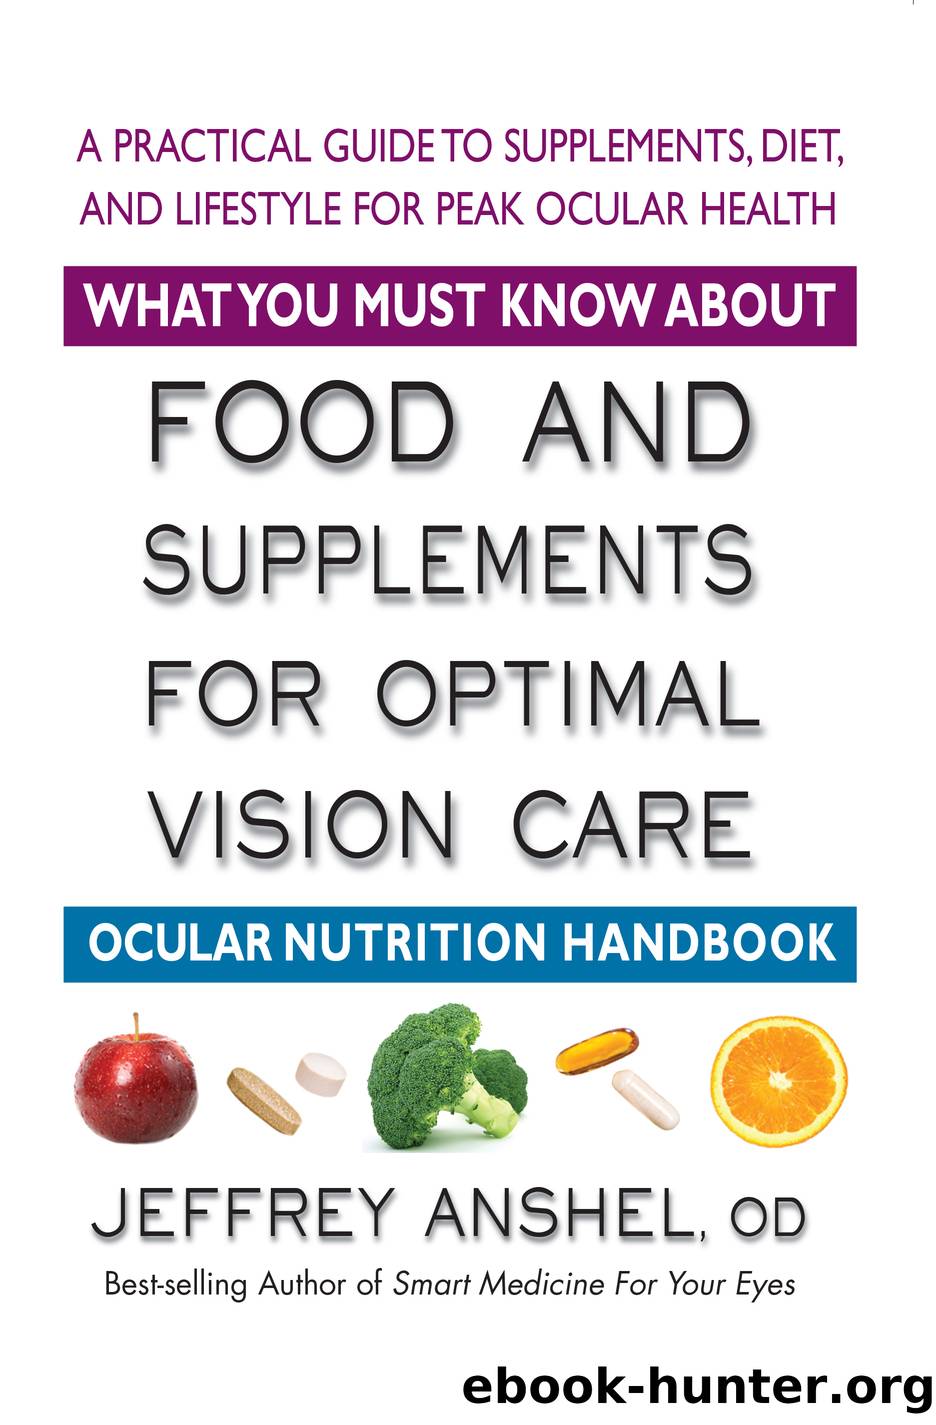 Food and Supplements for Optimal Vision Care by Jeffrey Anshel OD